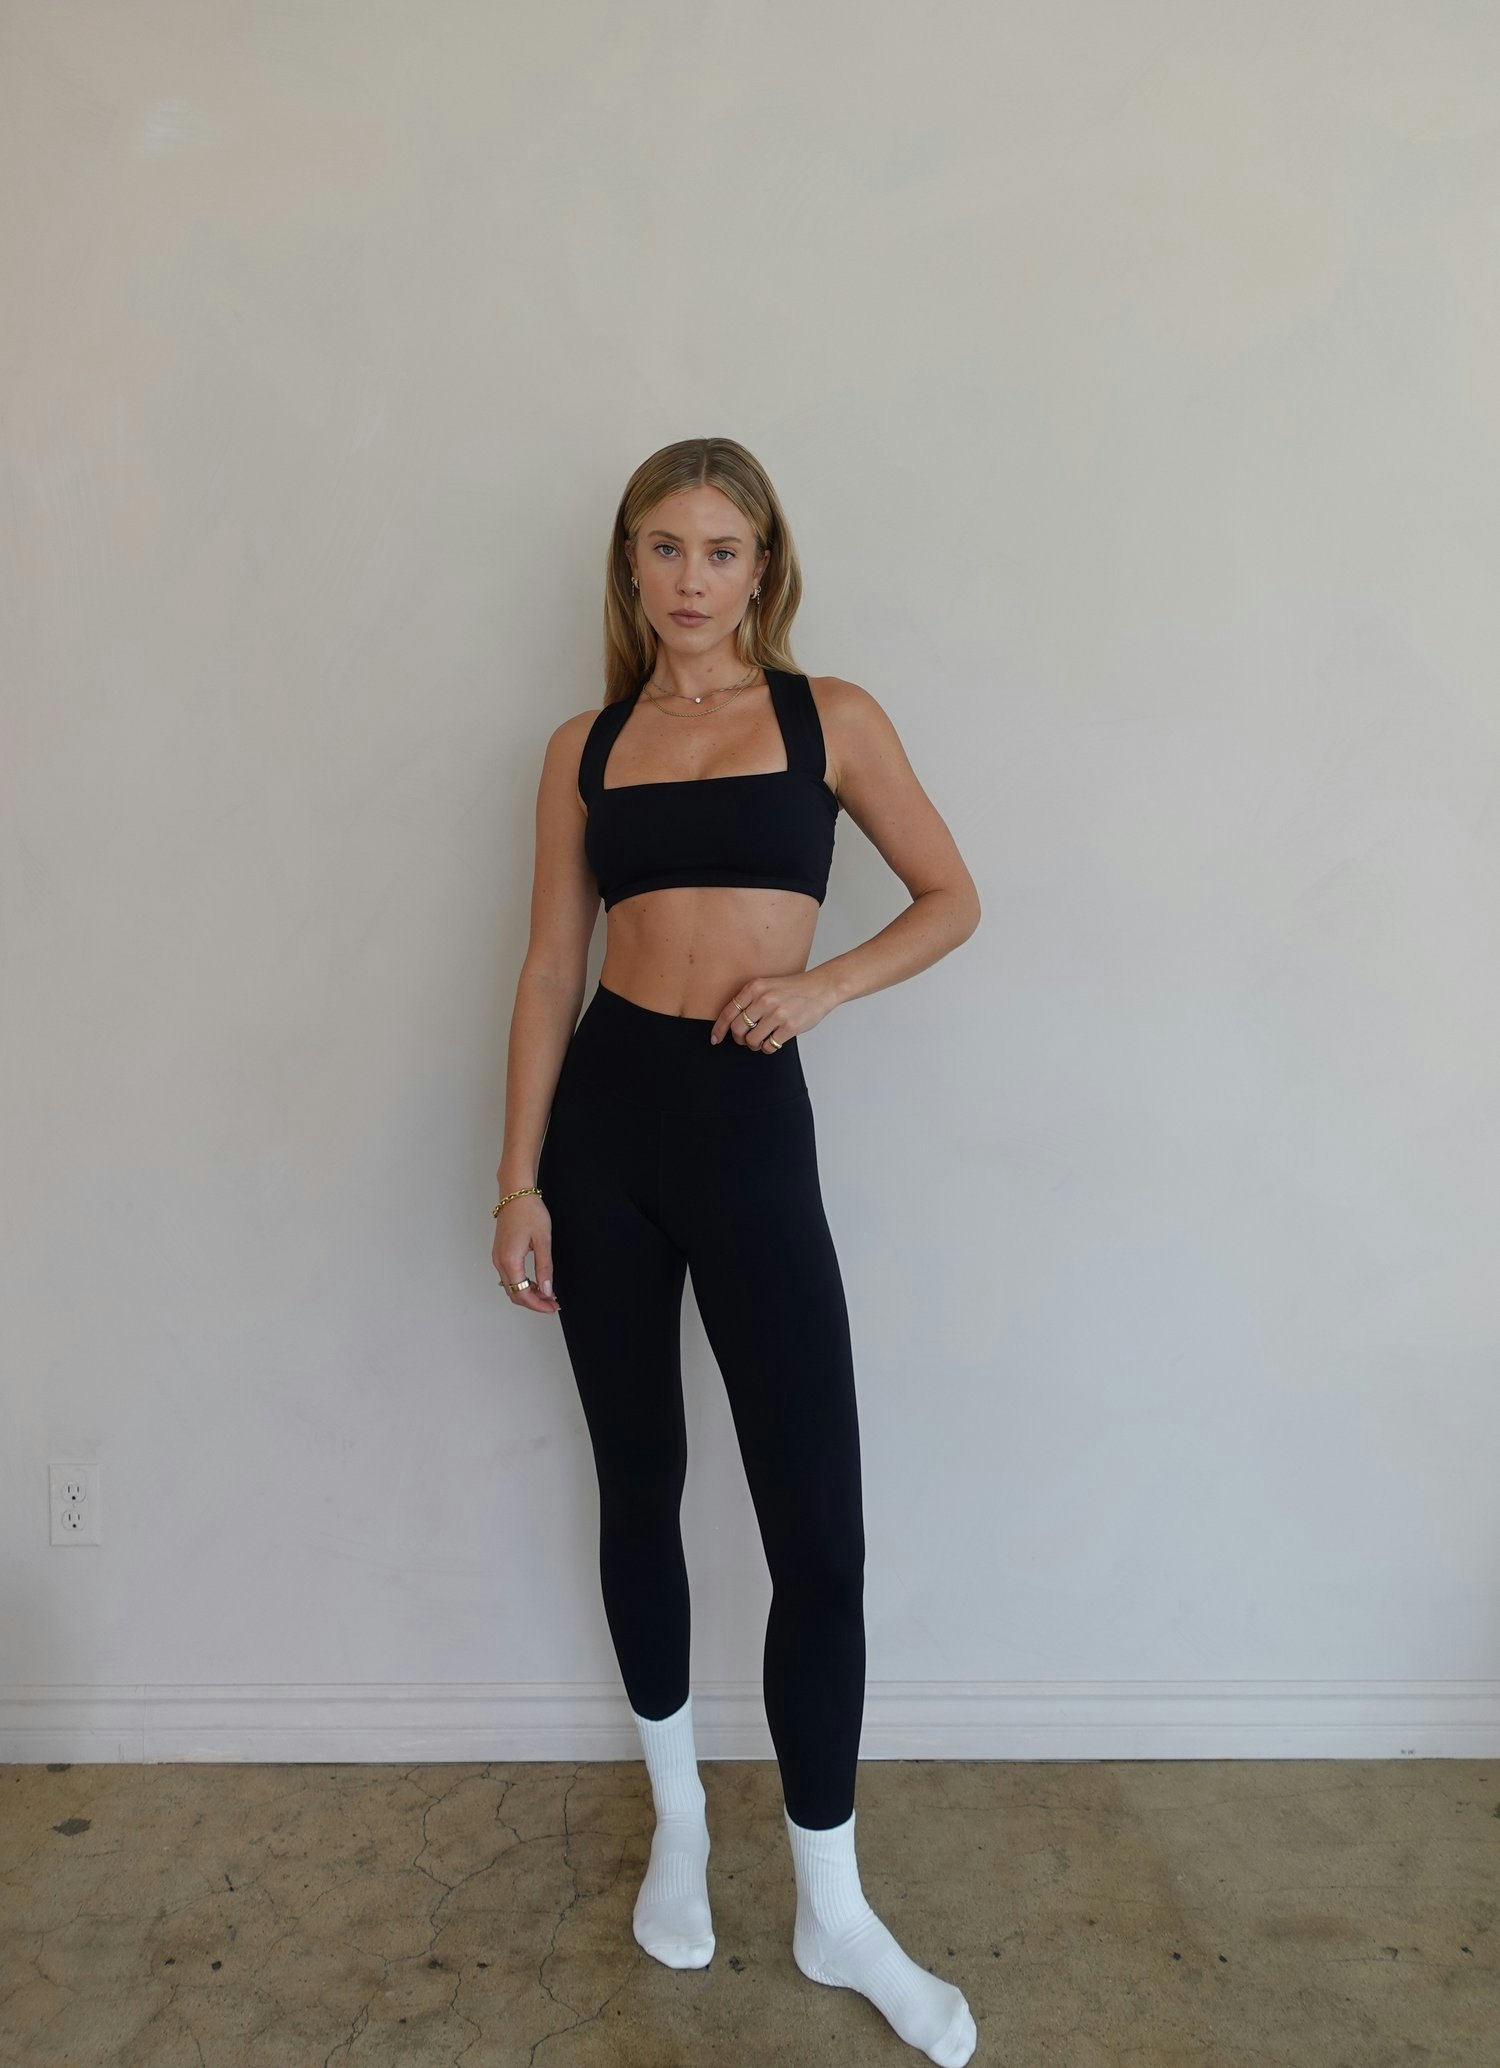 New Activewear Brands, Physclo, Will Help You Burn More Calories